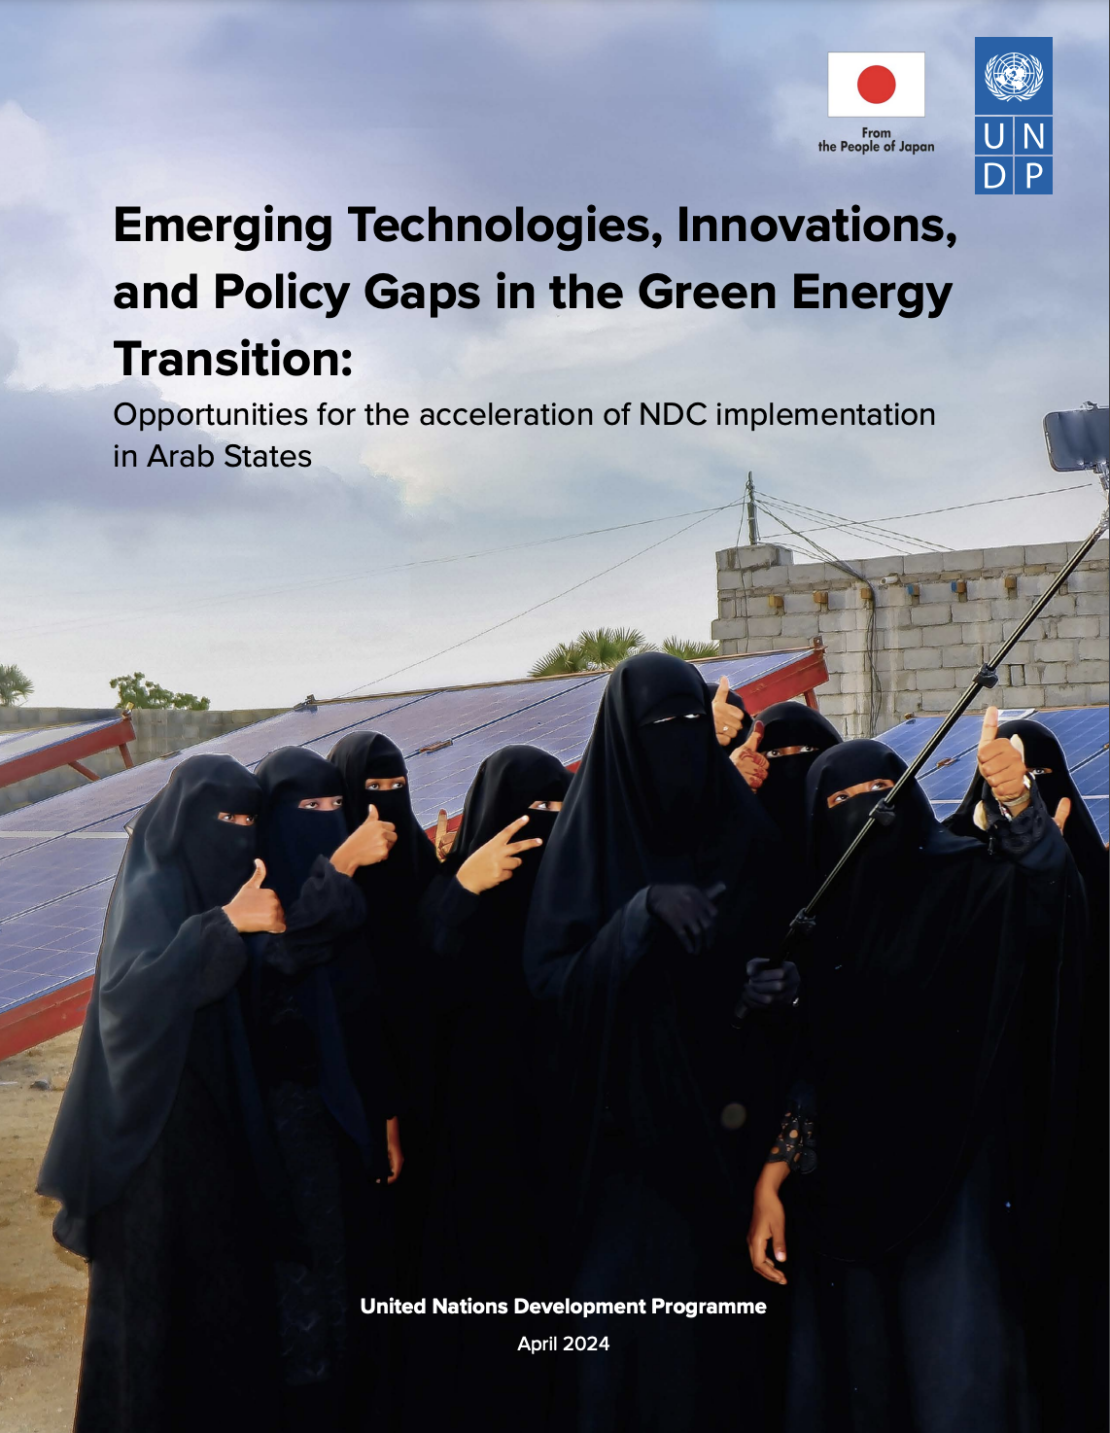 Emerging Technologies, Innovations and Policy Gaps in the Green Energy Transition